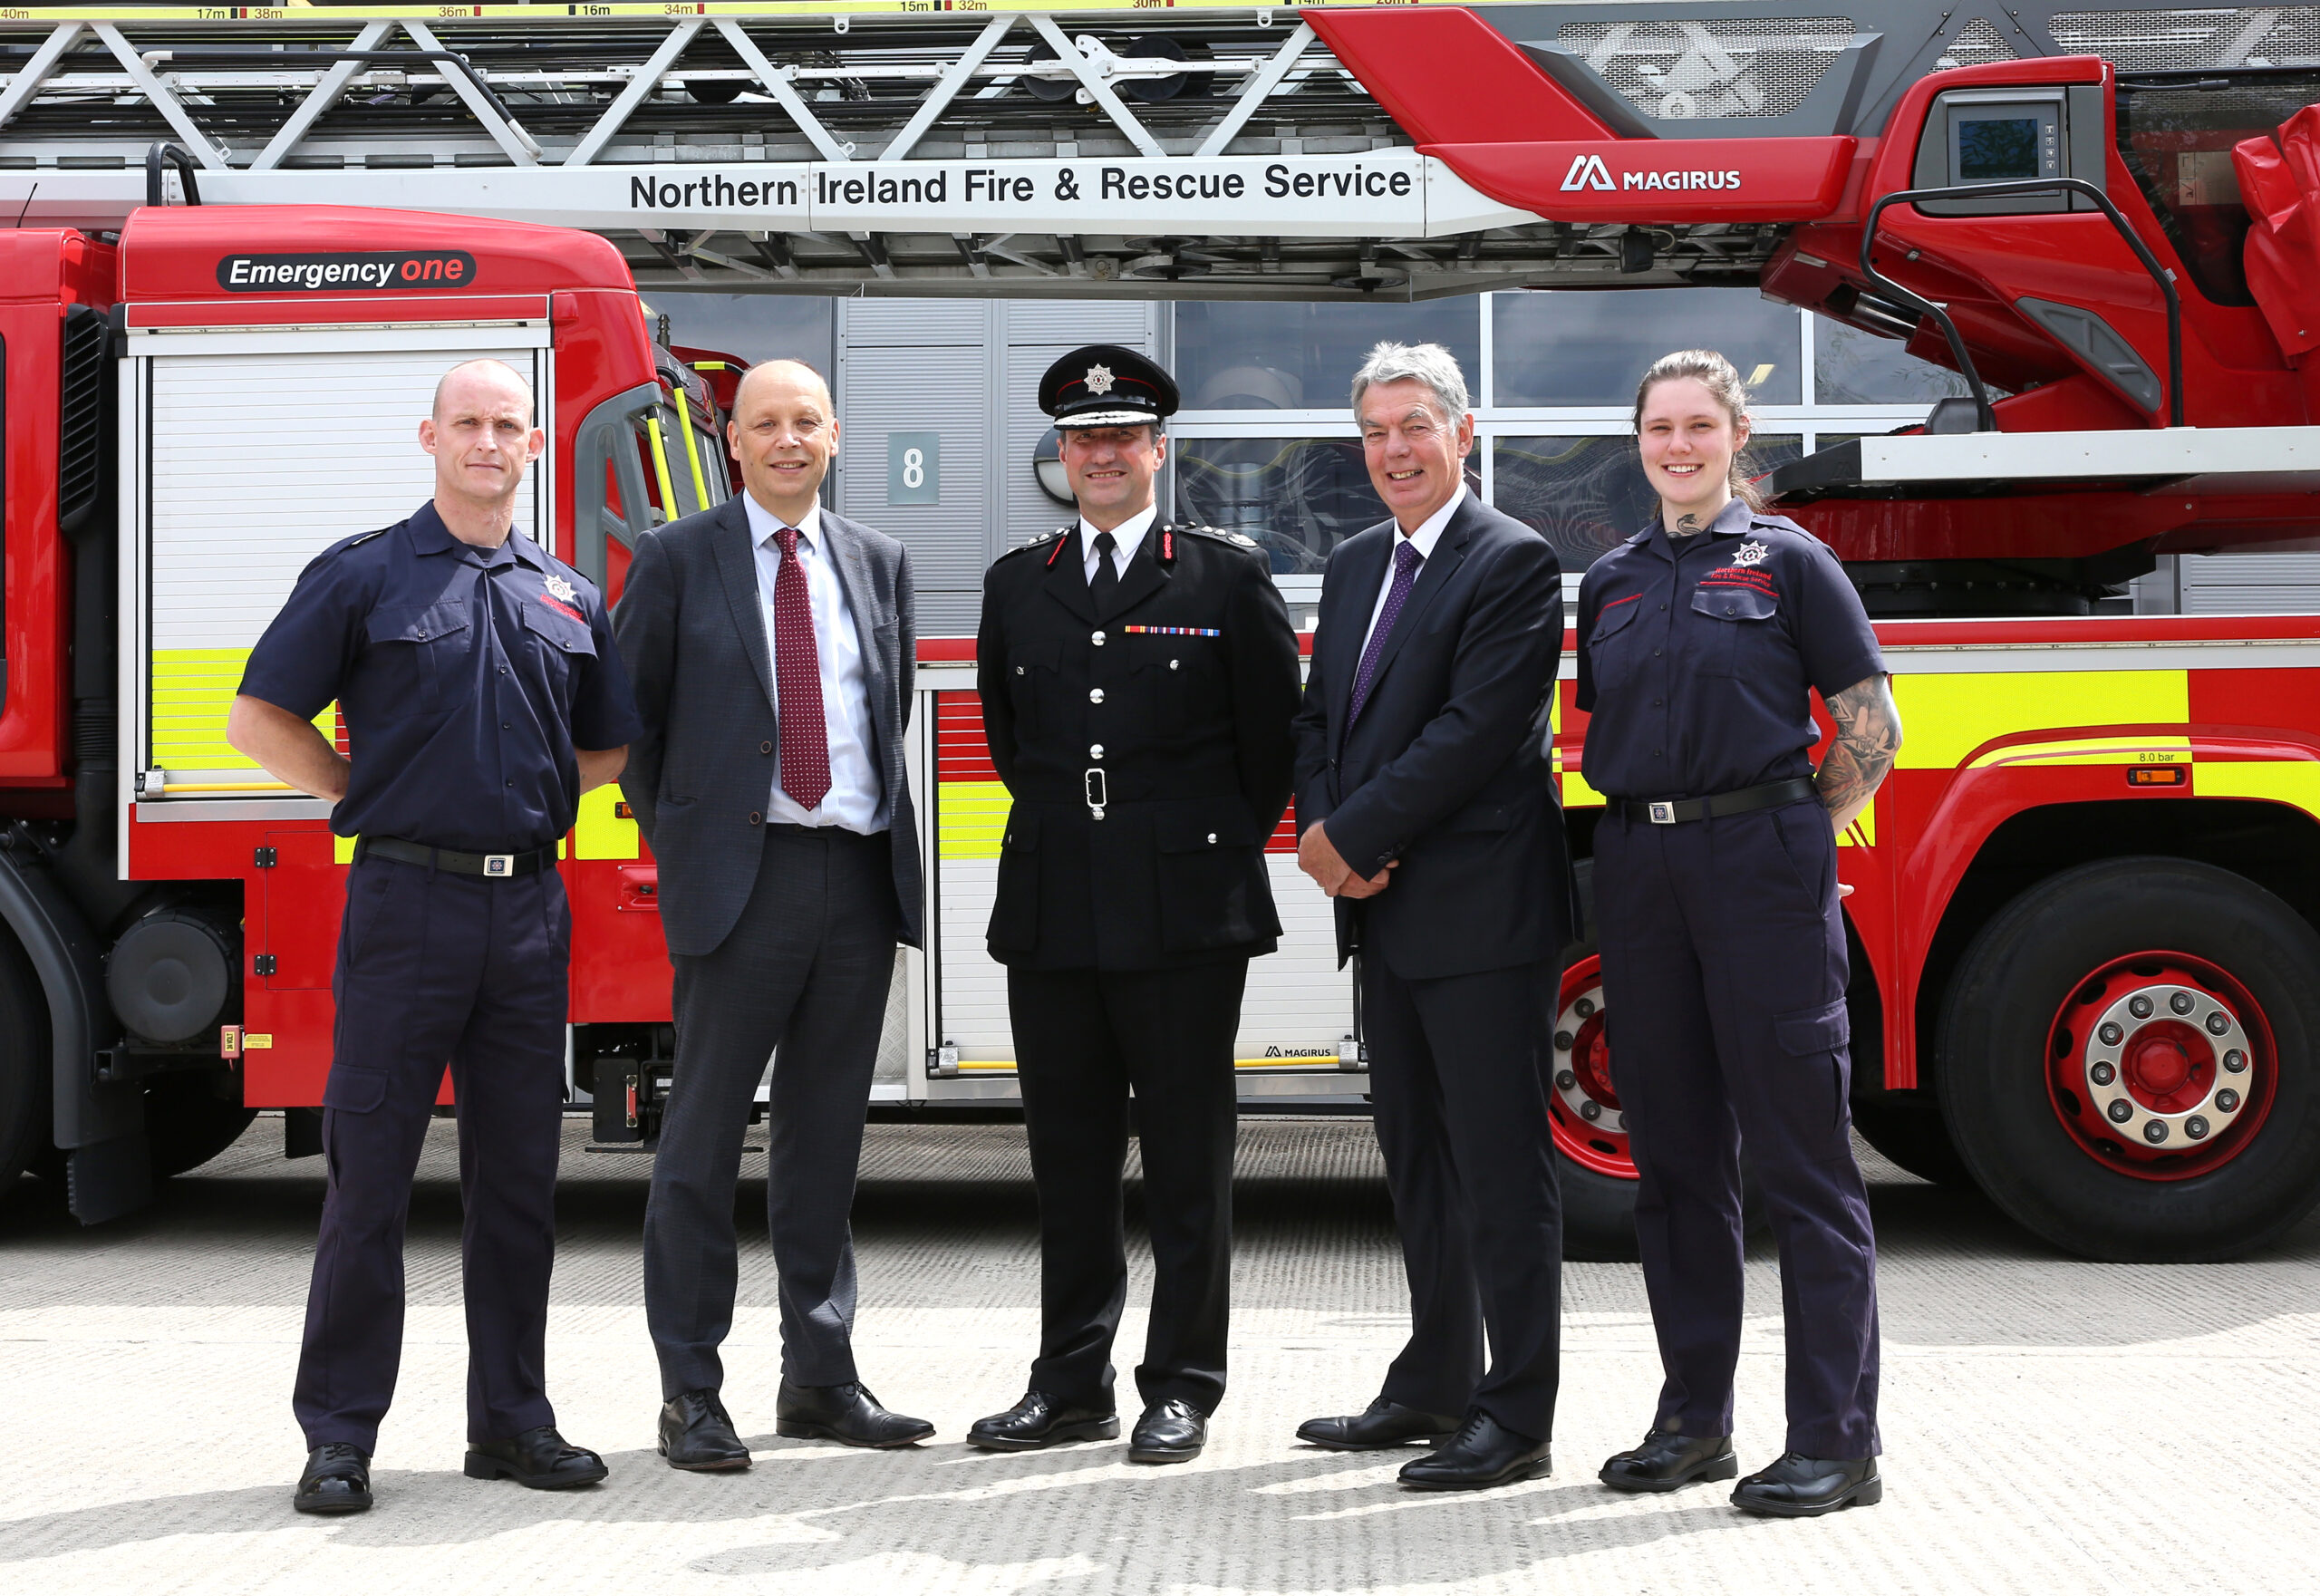 Firefighter Gareth Weir; Permanent Secretary at the Department of Health, Peter May; NIFRS Interim Chief Fire & Rescue Officer, Andy Hearn; NIFRS Chairperson, Jay Colville; and Firefighter Hayley Agnew.